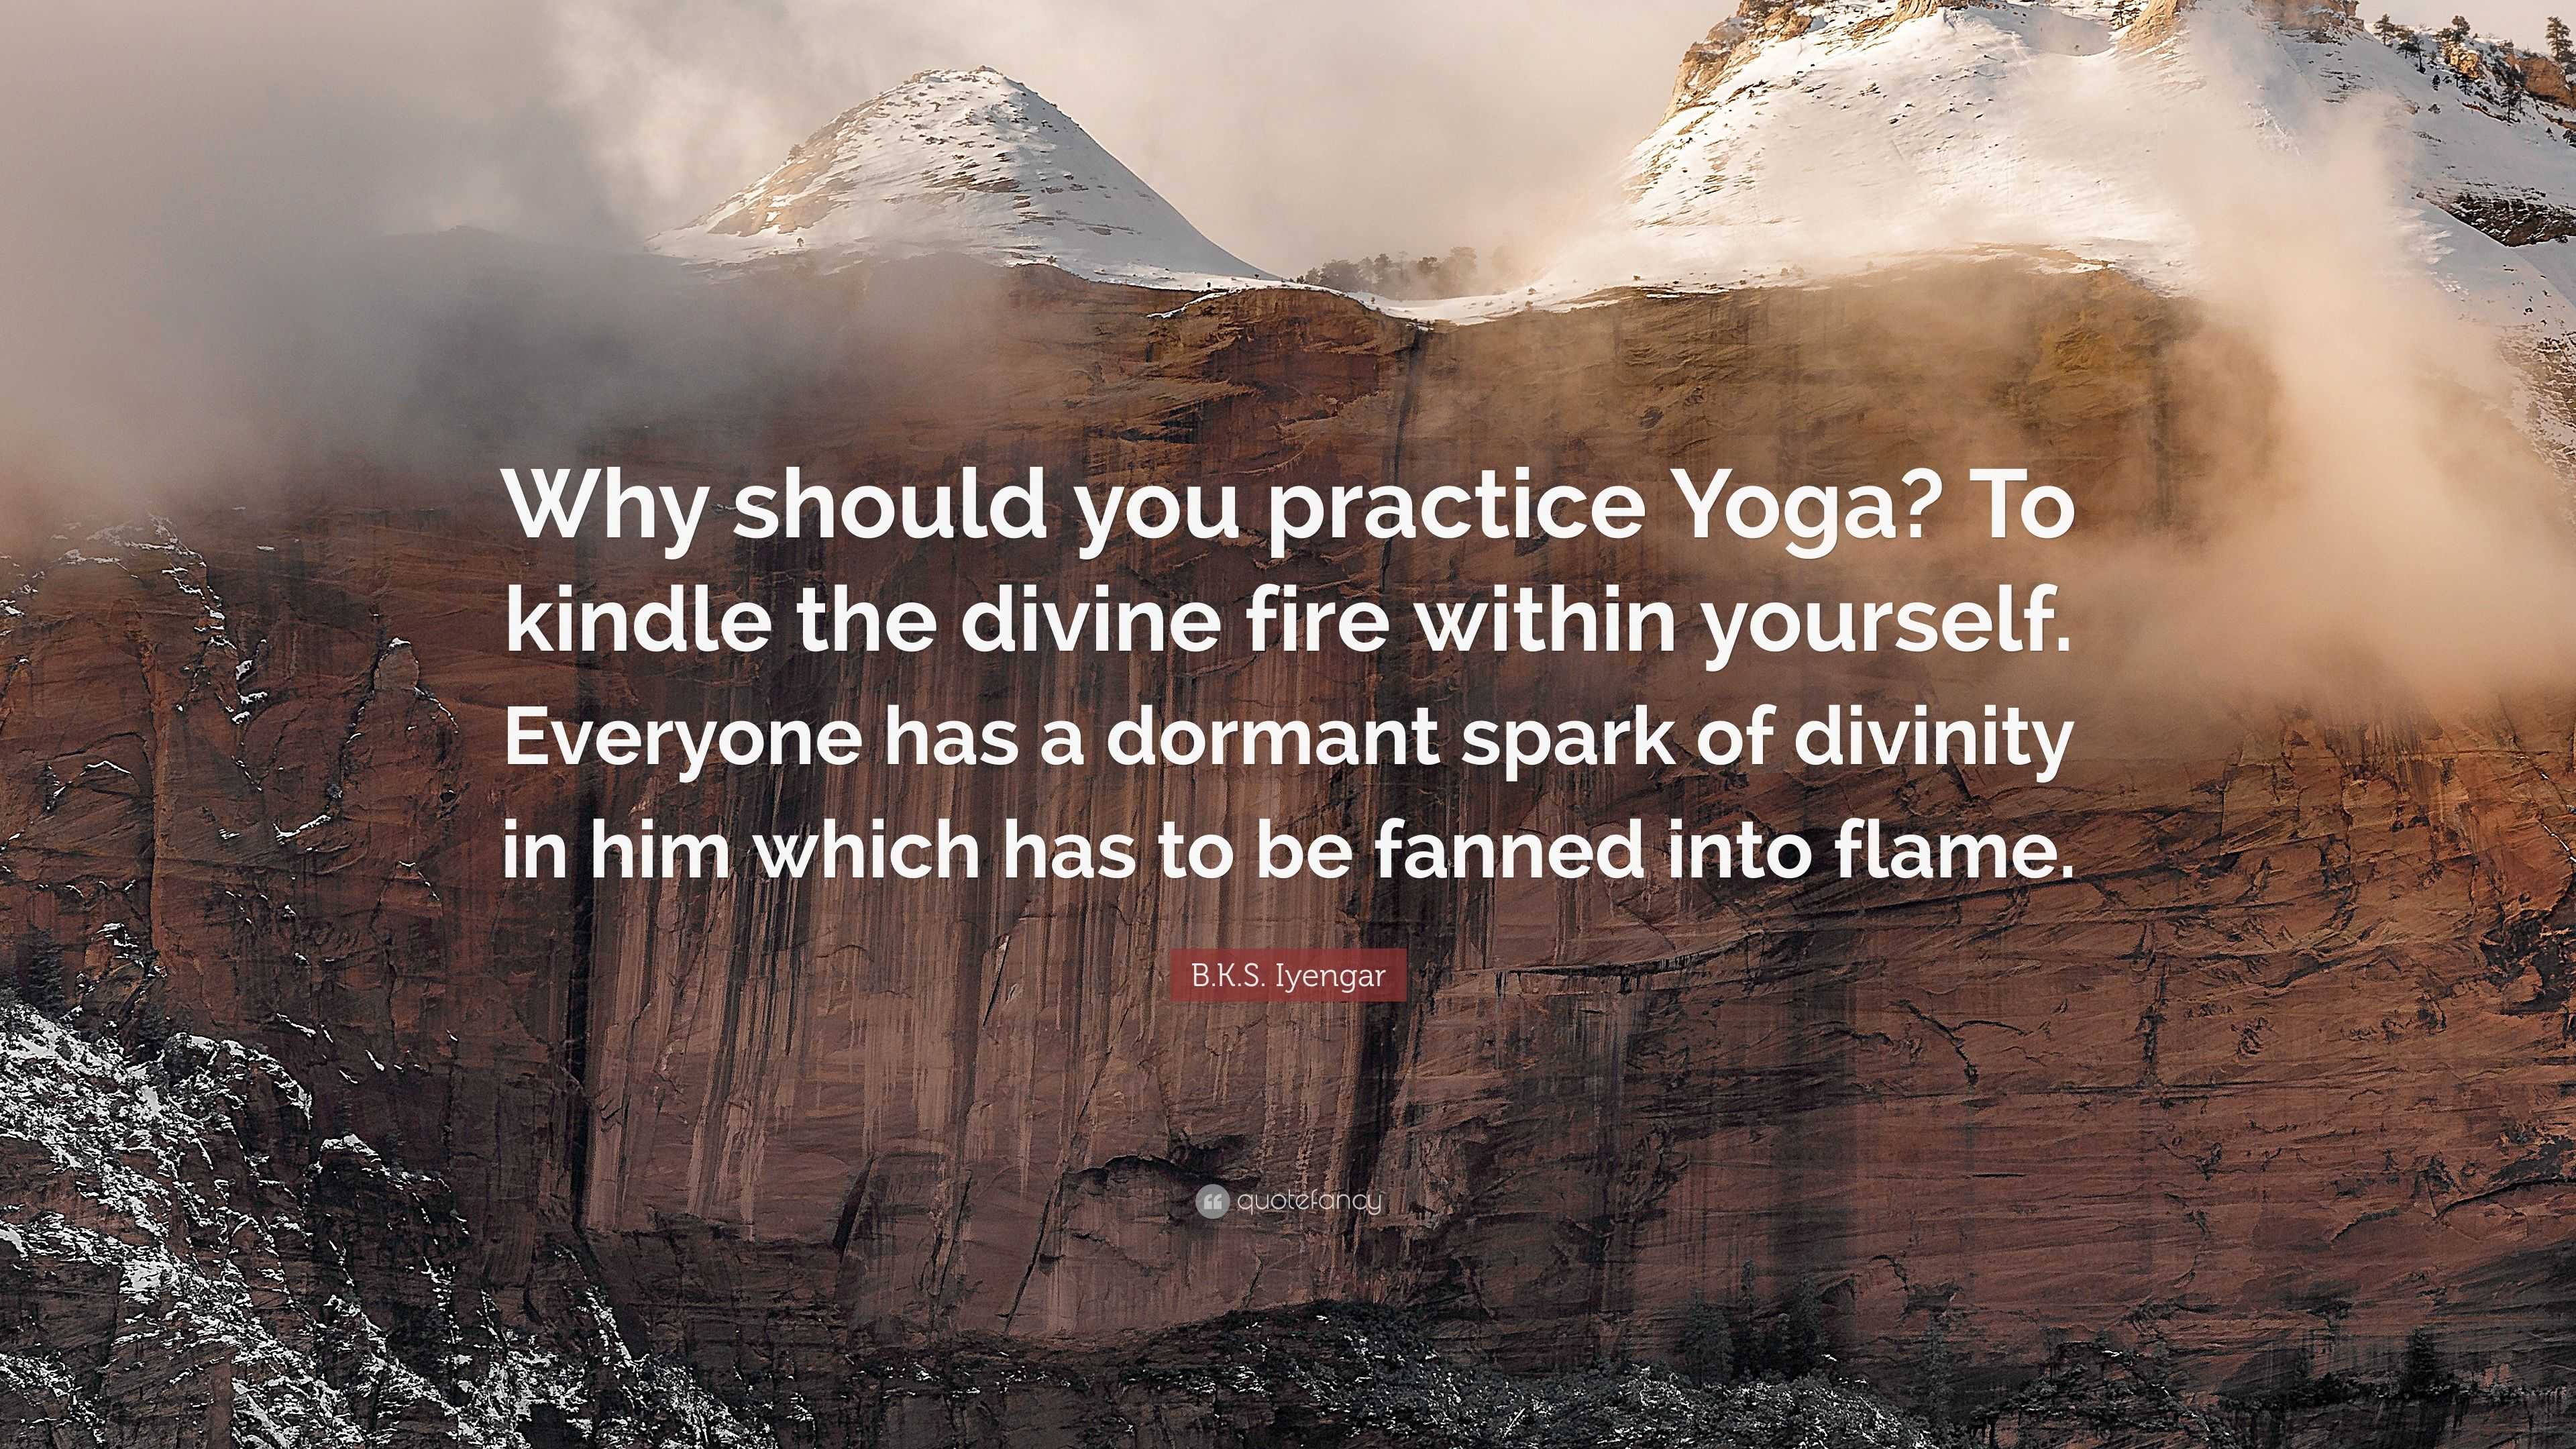 https://quotefancy.com/media/wallpaper/3840x2160/2181516-B-K-S-Iyengar-Quote-Why-should-you-practice-Yoga-To-kindle-the.jpg